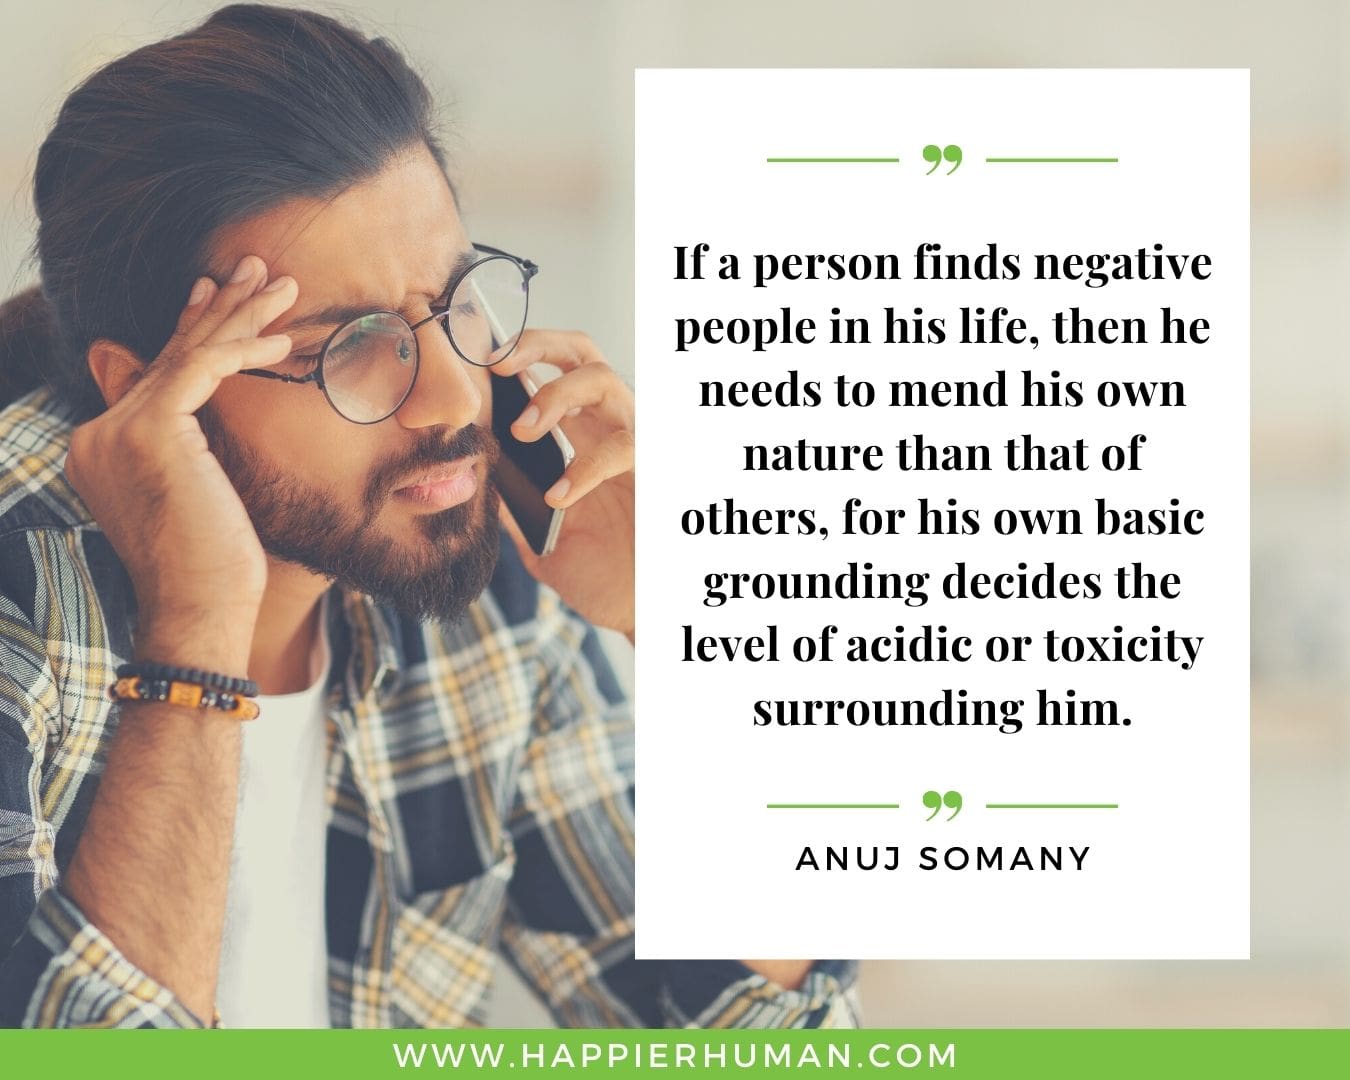 Toxic People Quotes - “If a person finds negative people in his life, then he needs to mend his own nature than that of others, for his own basic grounding decides the level of acidic or toxicity surrounding him.” – Anuj Somany